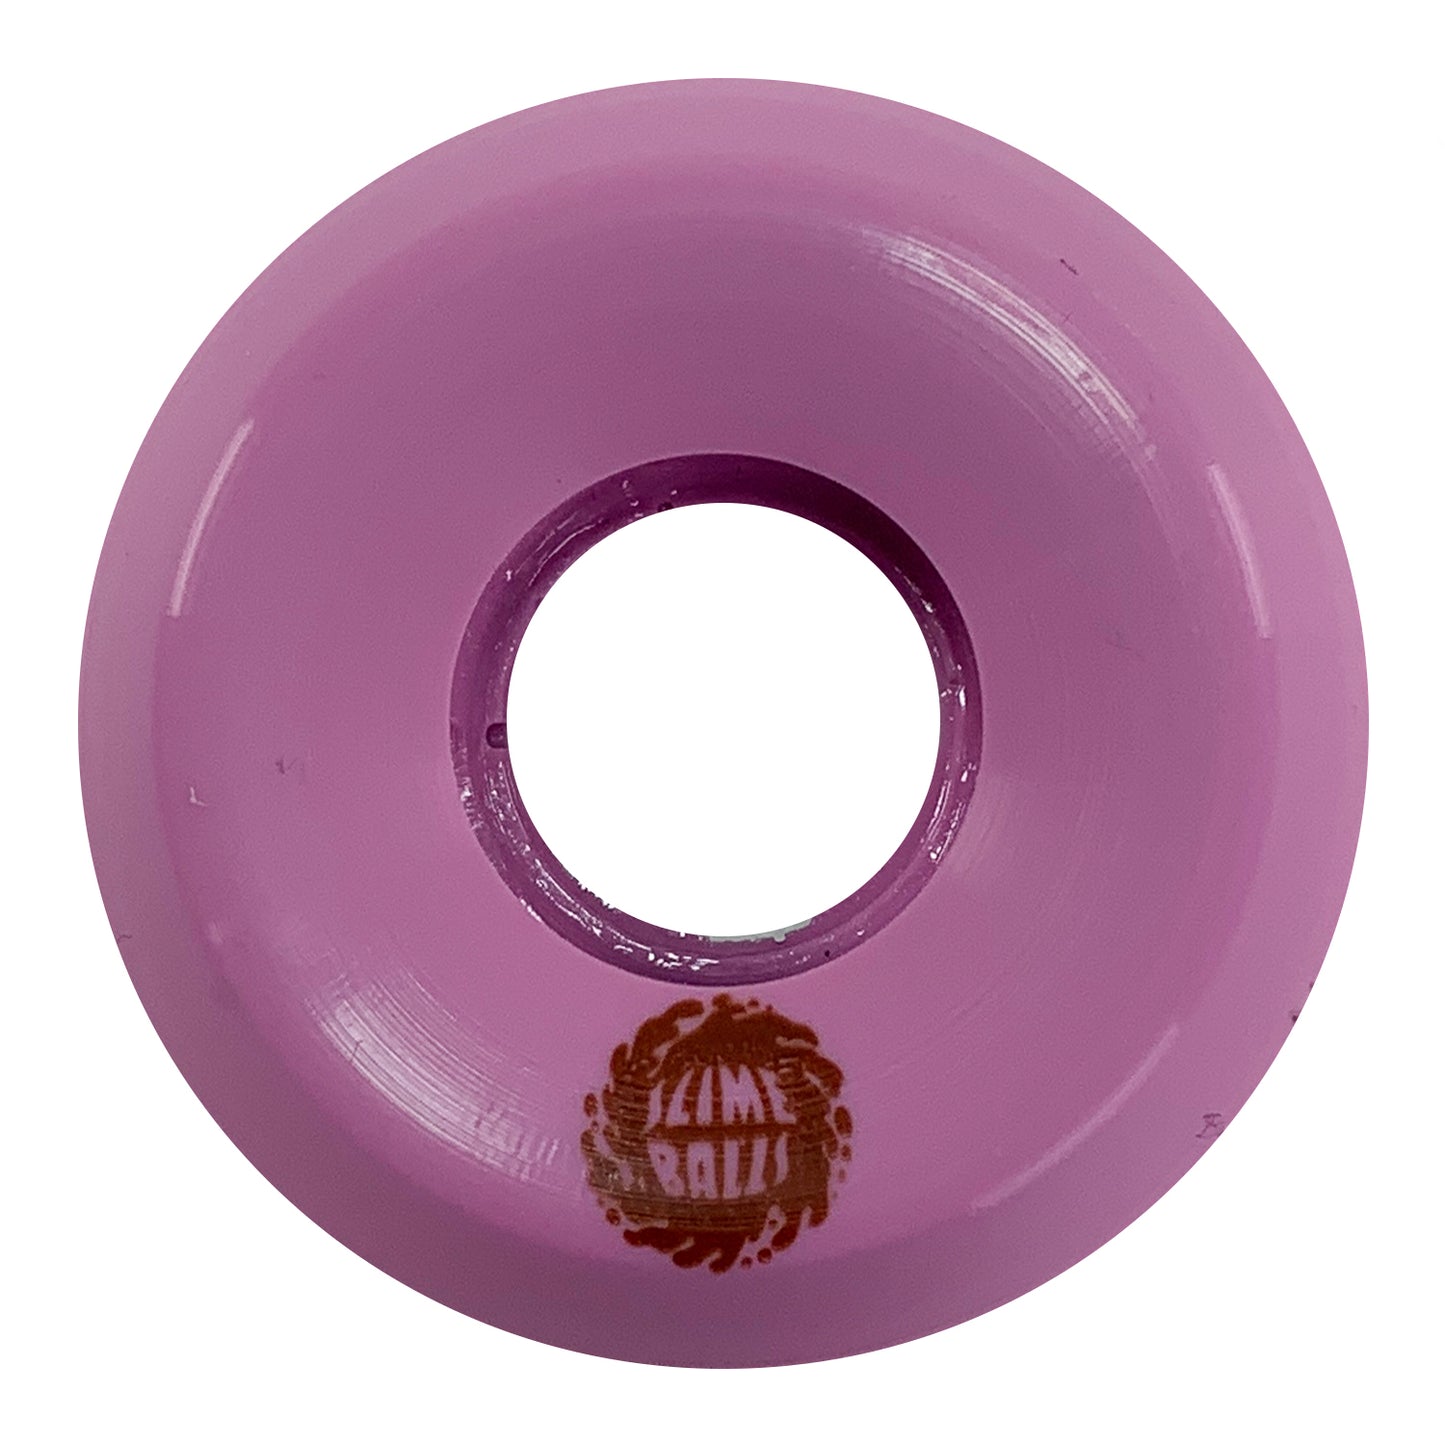 Slime Balls - 54mm - 99a J. Fish Bunny Speed Balls - Pink - Prime Delux Store